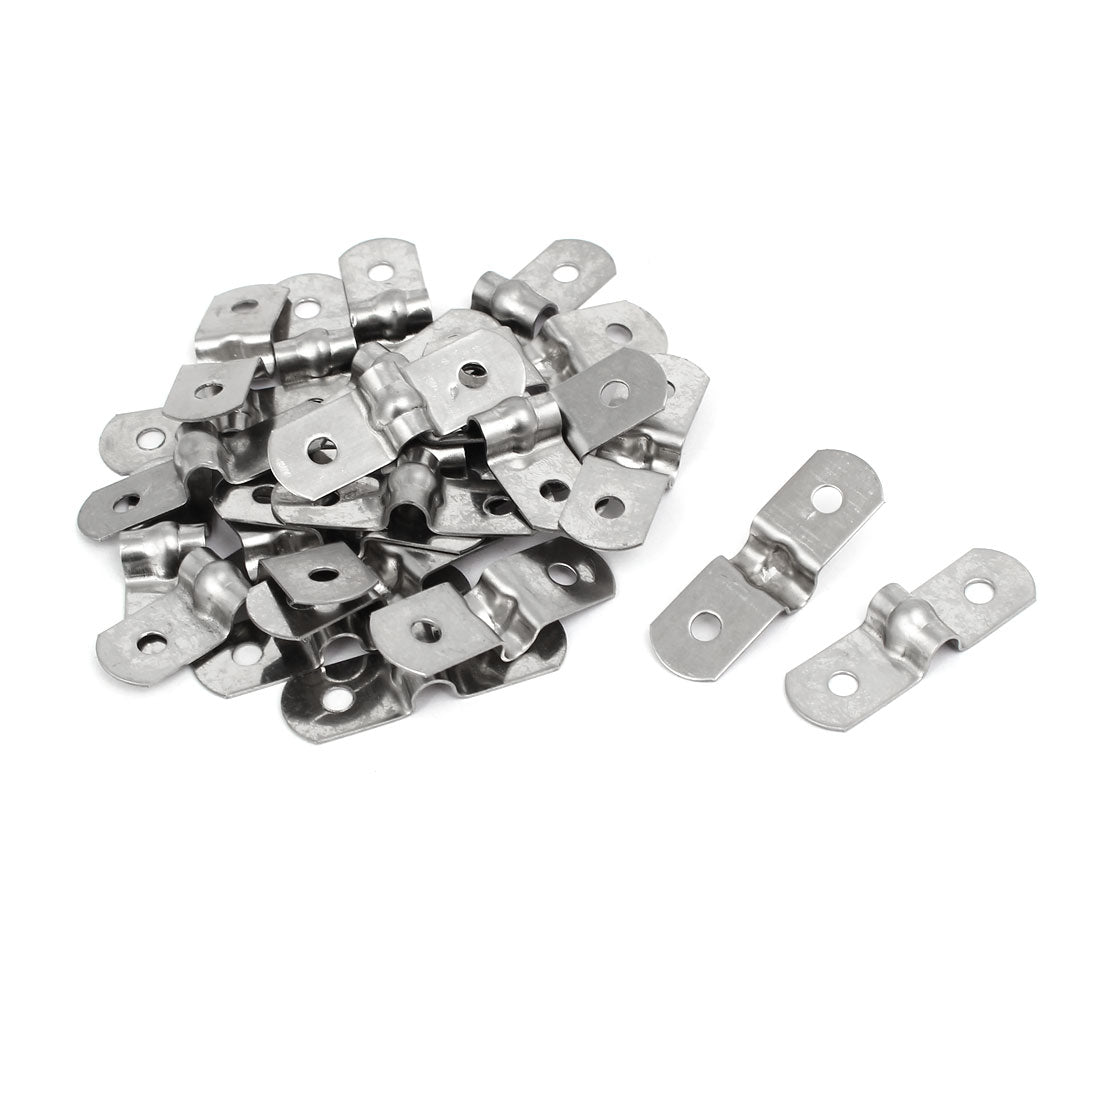 uxcell Uxcell M5 201 Stainless Steel Two Hole Pipe Straps Tension Tube Clip Clamp 25PCS